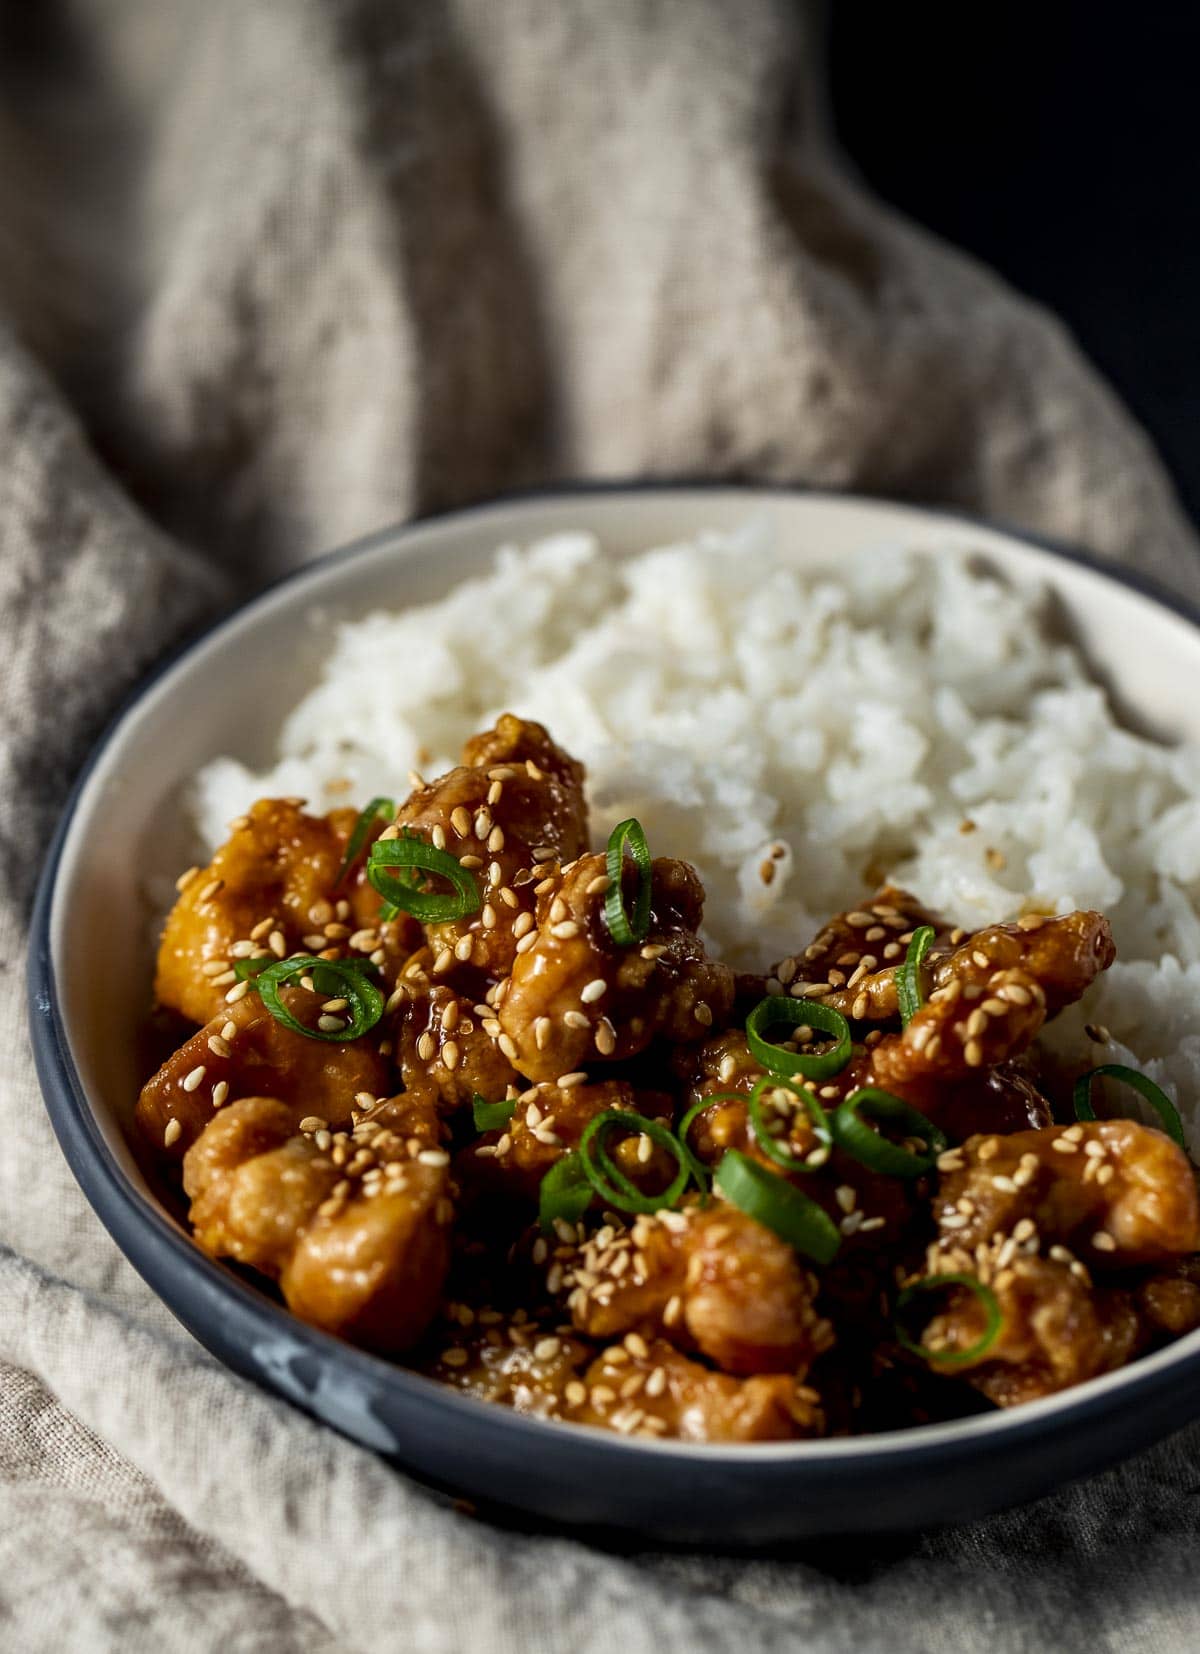 Orange chicken and white rice in a bowl.